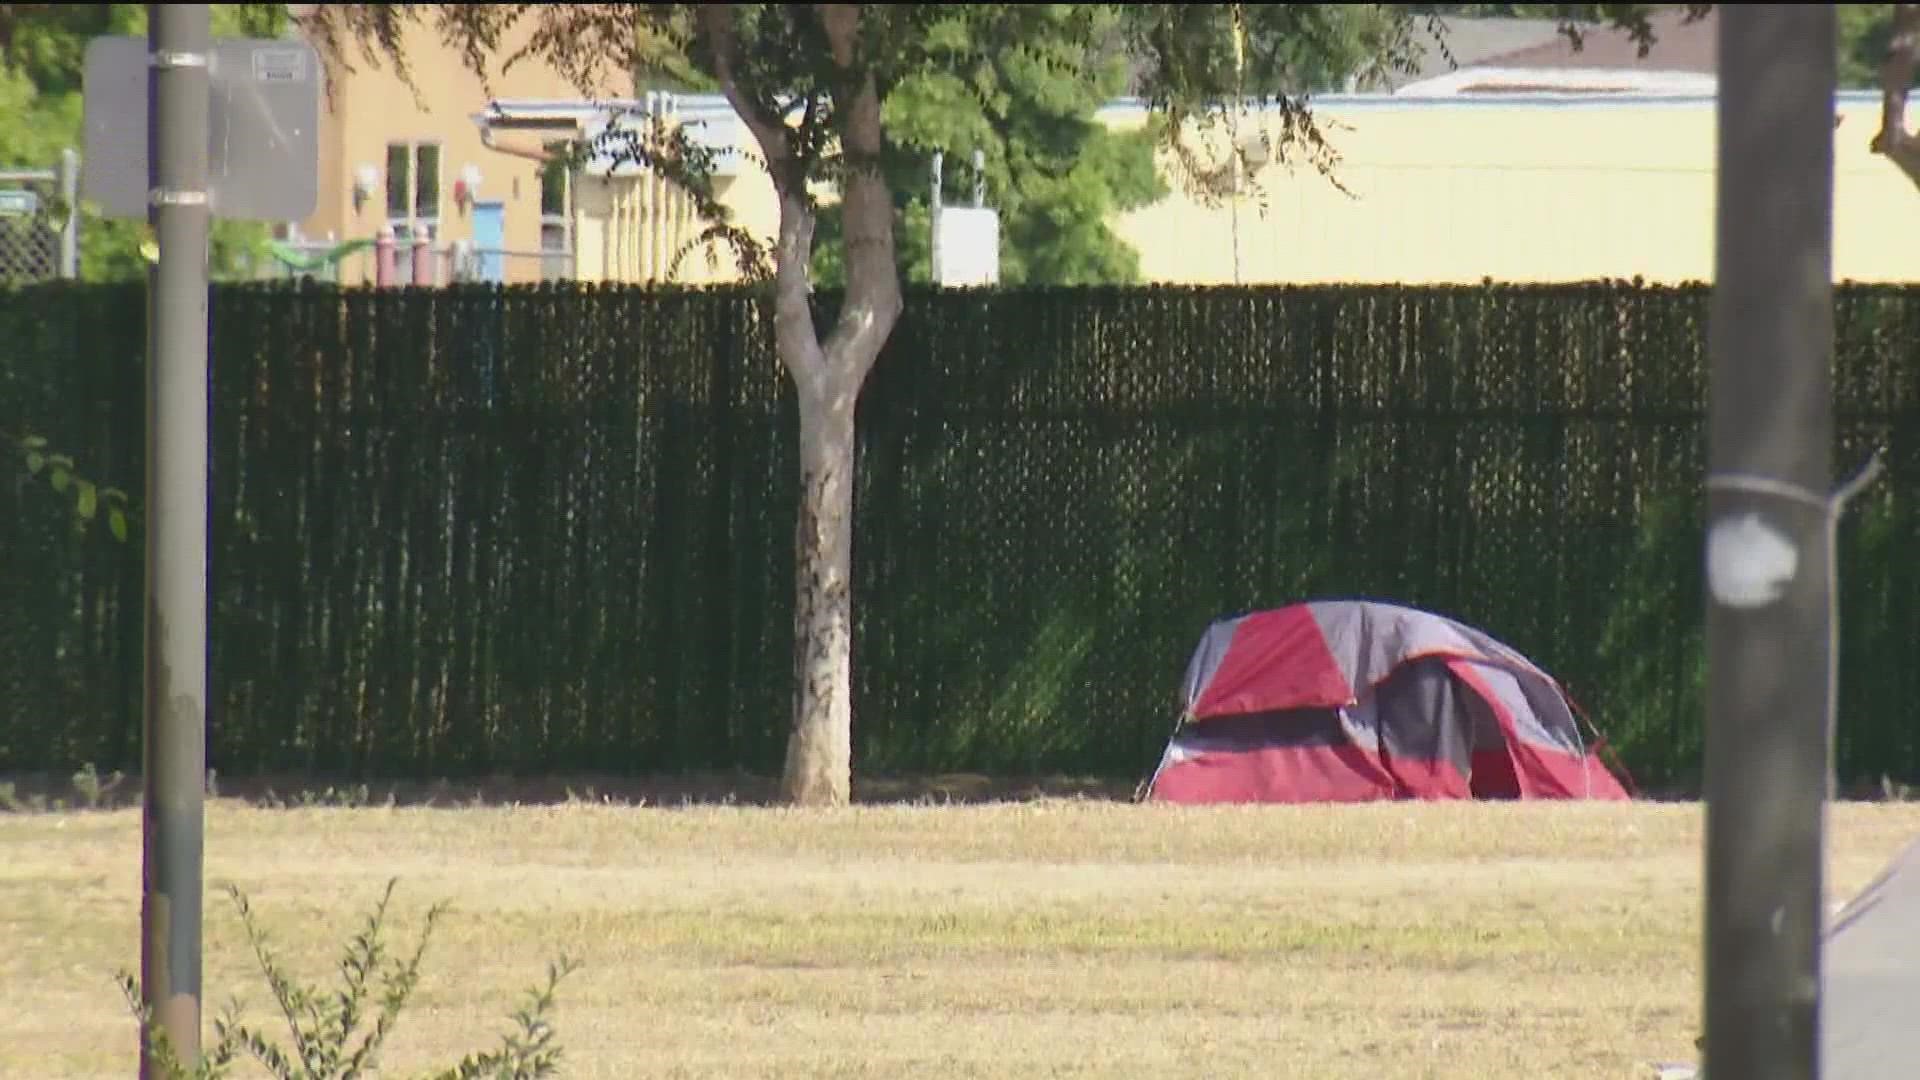 Council member John McCann told CBS 8 he will propose a ban on encampments within 500 feet of schools.